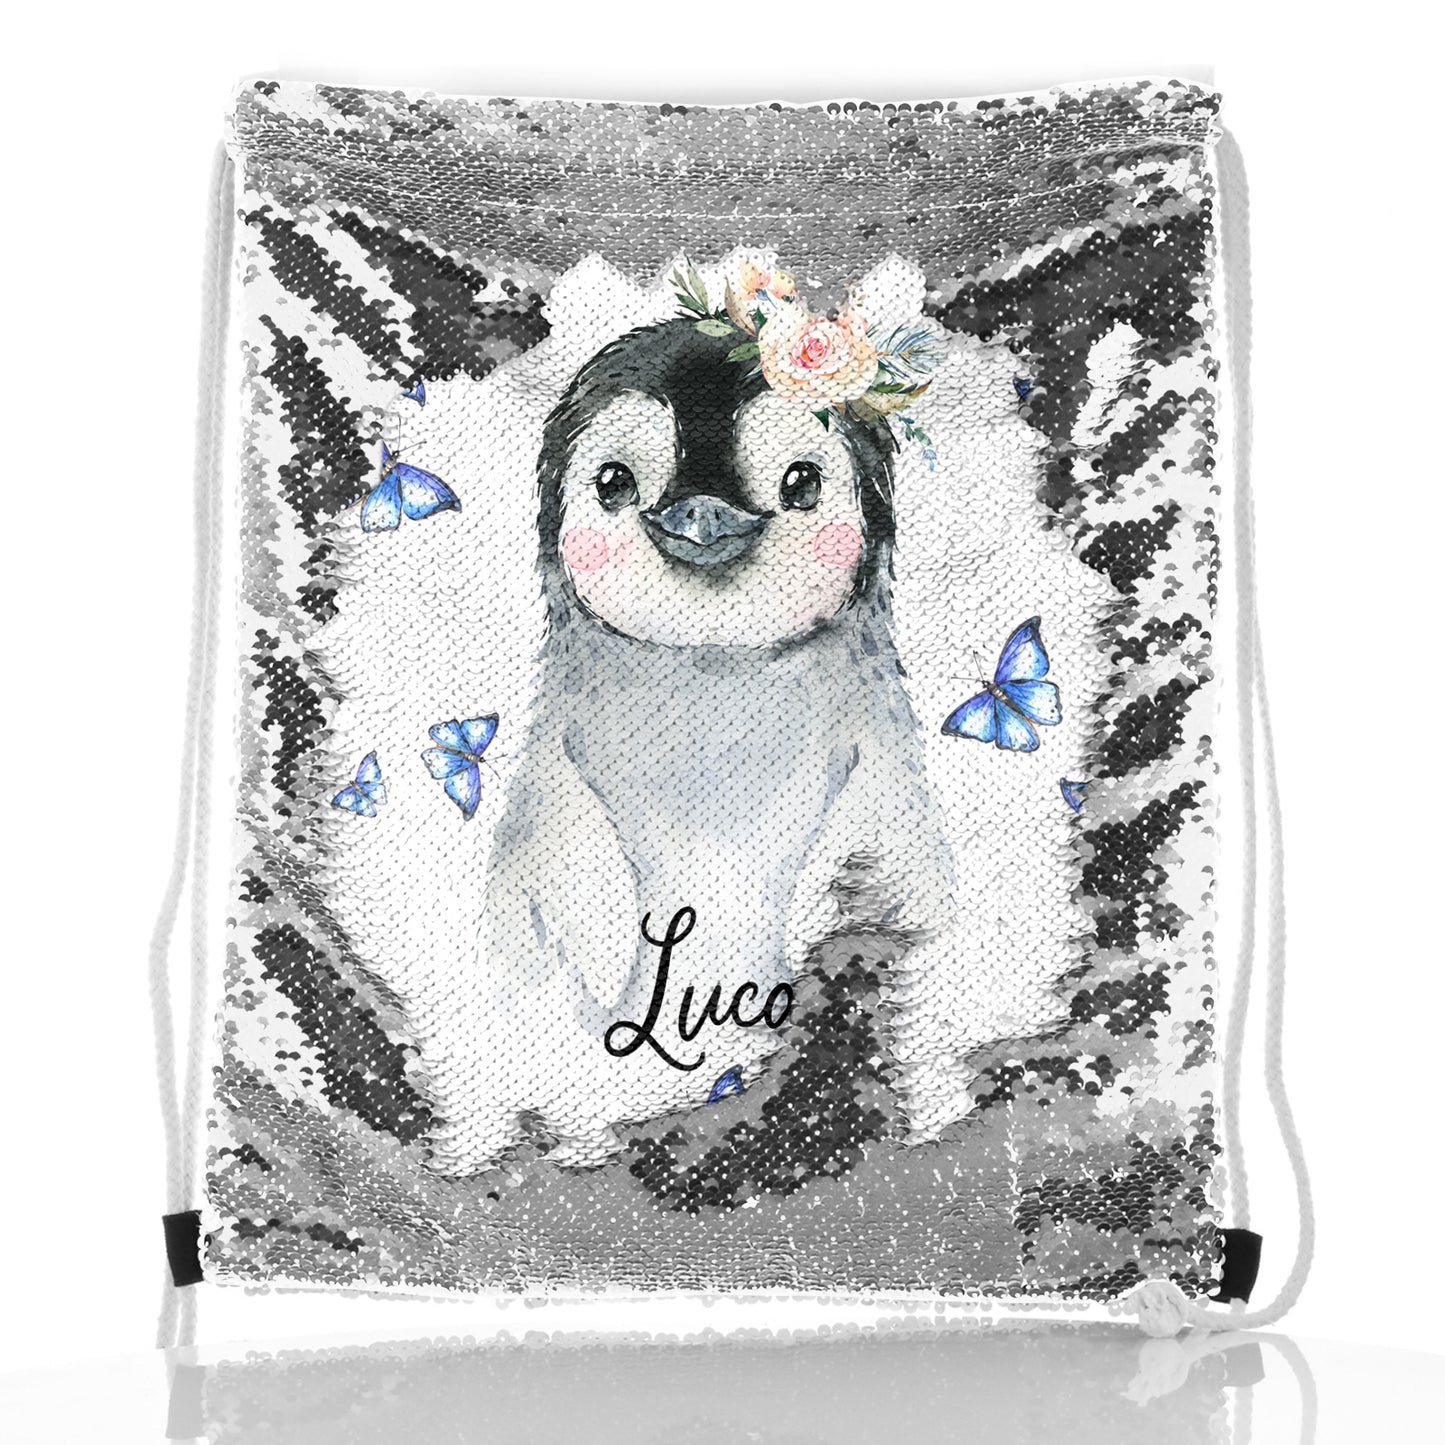 Personalised Sequin Drawstring Backpack with Grey Penguin Blue Butterflies and Cute Text